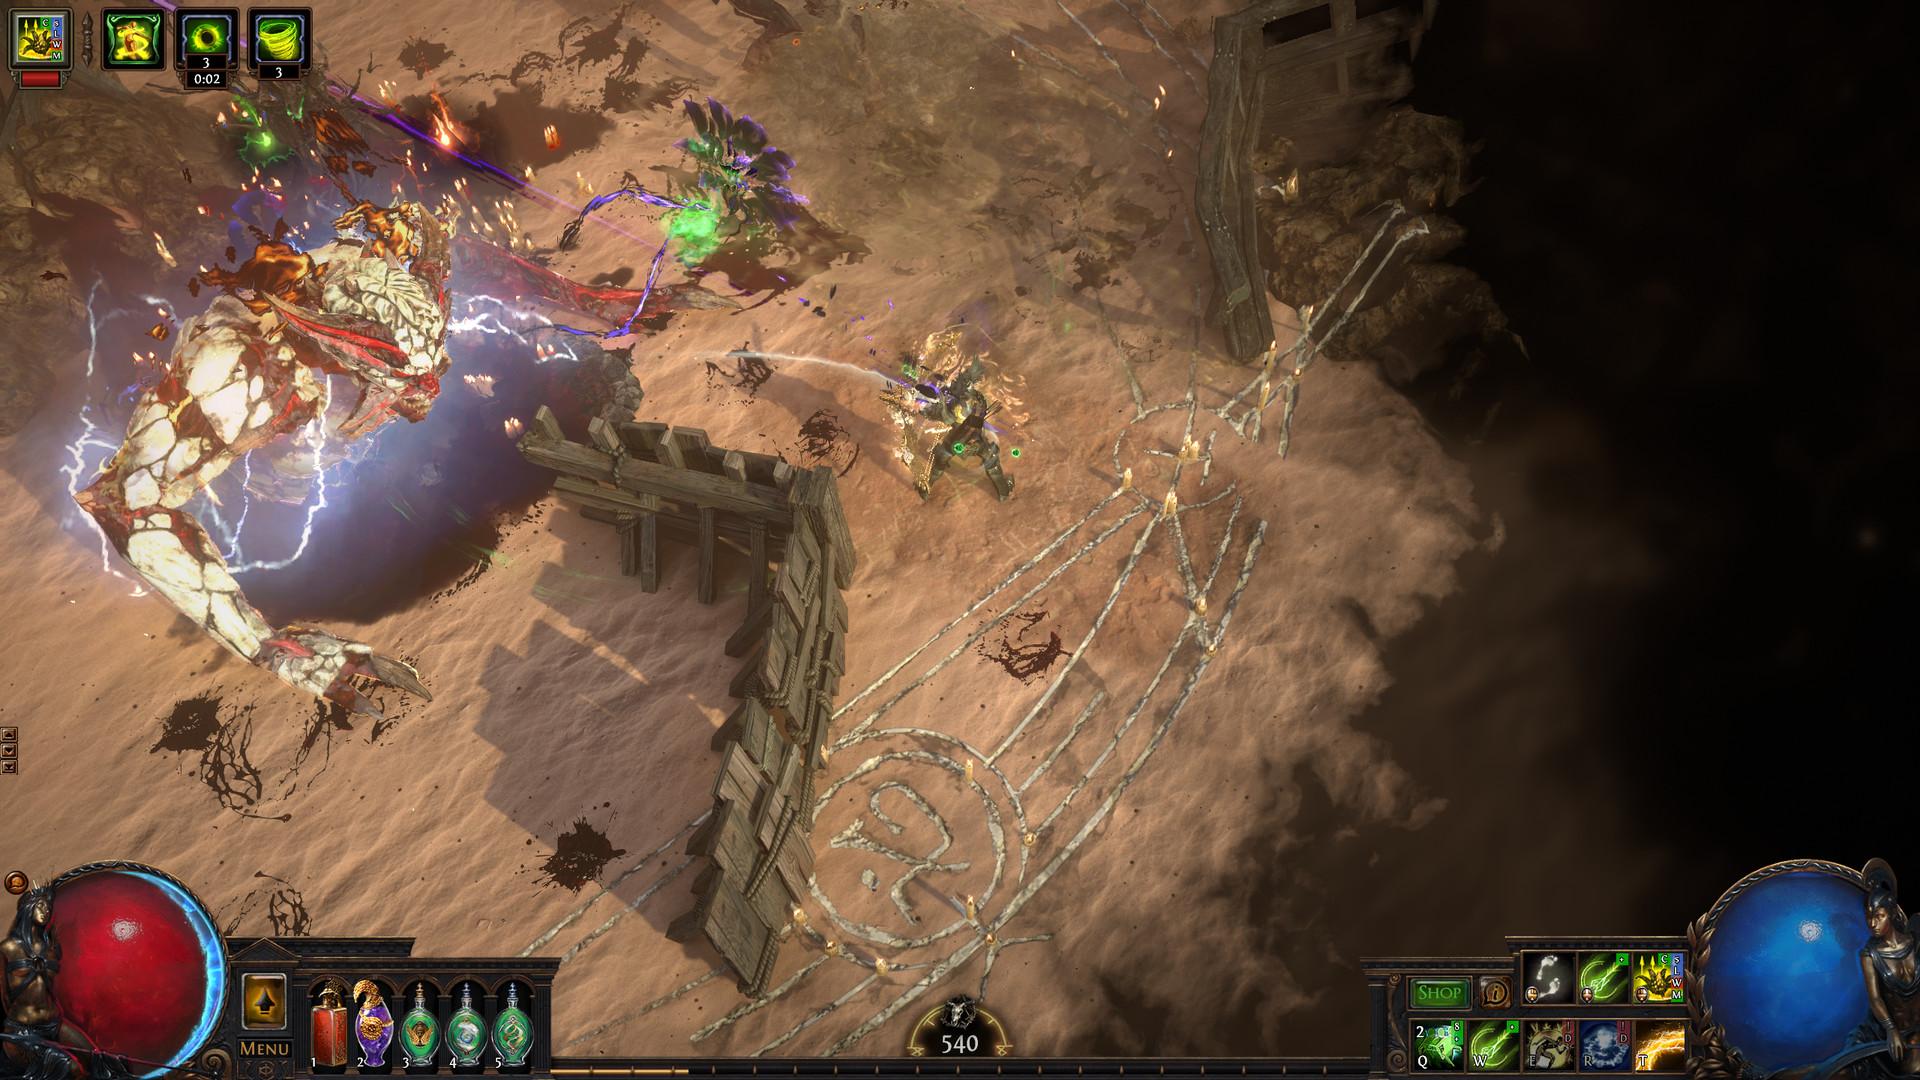 Screenshot №13 from game Path of Exile